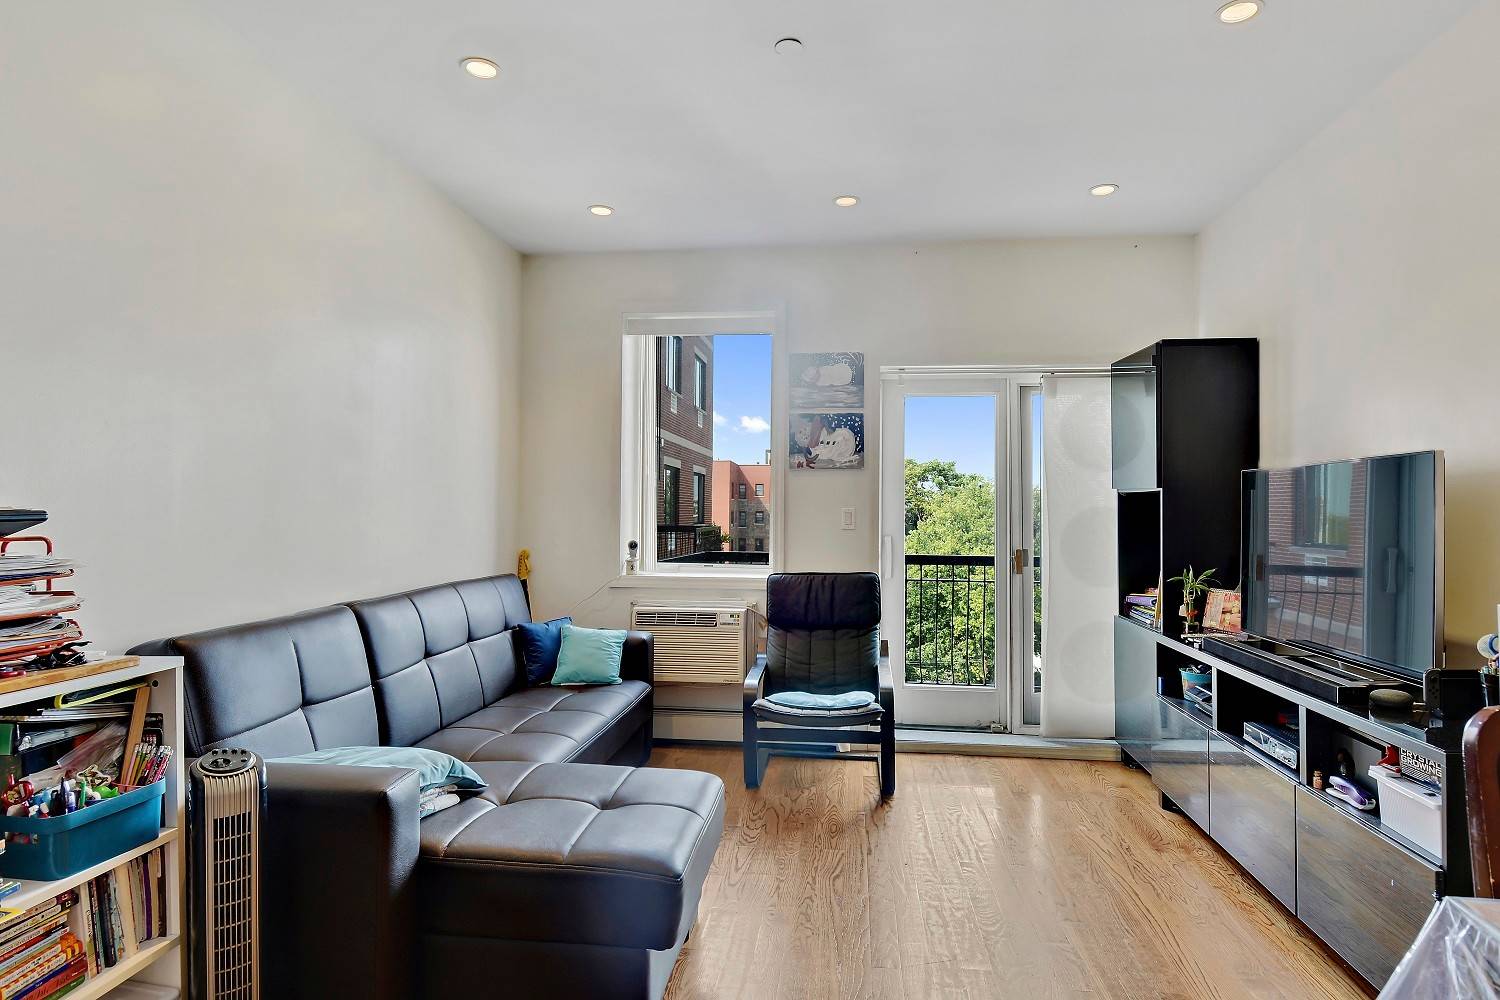 Bright and beautiful 2 bedroom and 2 bathroom condo in the heart of Bensonhurst.